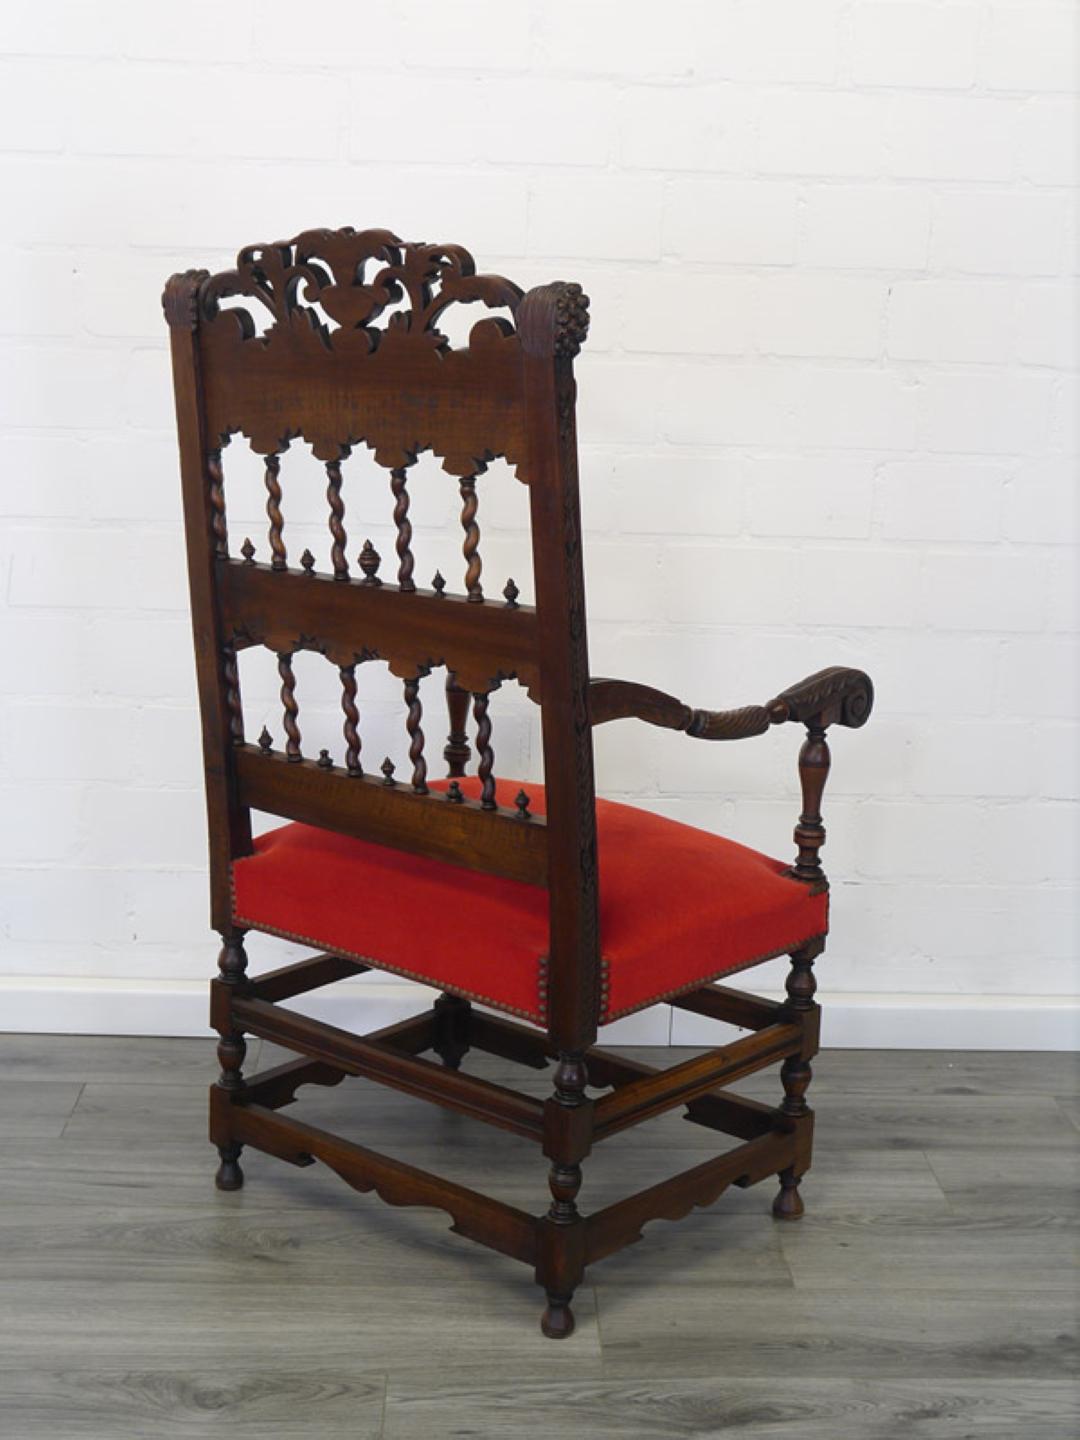 Classic antique armchair with a Renaissance design from the Revival period circa 1880. Made out of solid walnut wood and covered with a red velvet upholstery with round headed nails. The backrest if decorated with stunningly carved ornamentations,